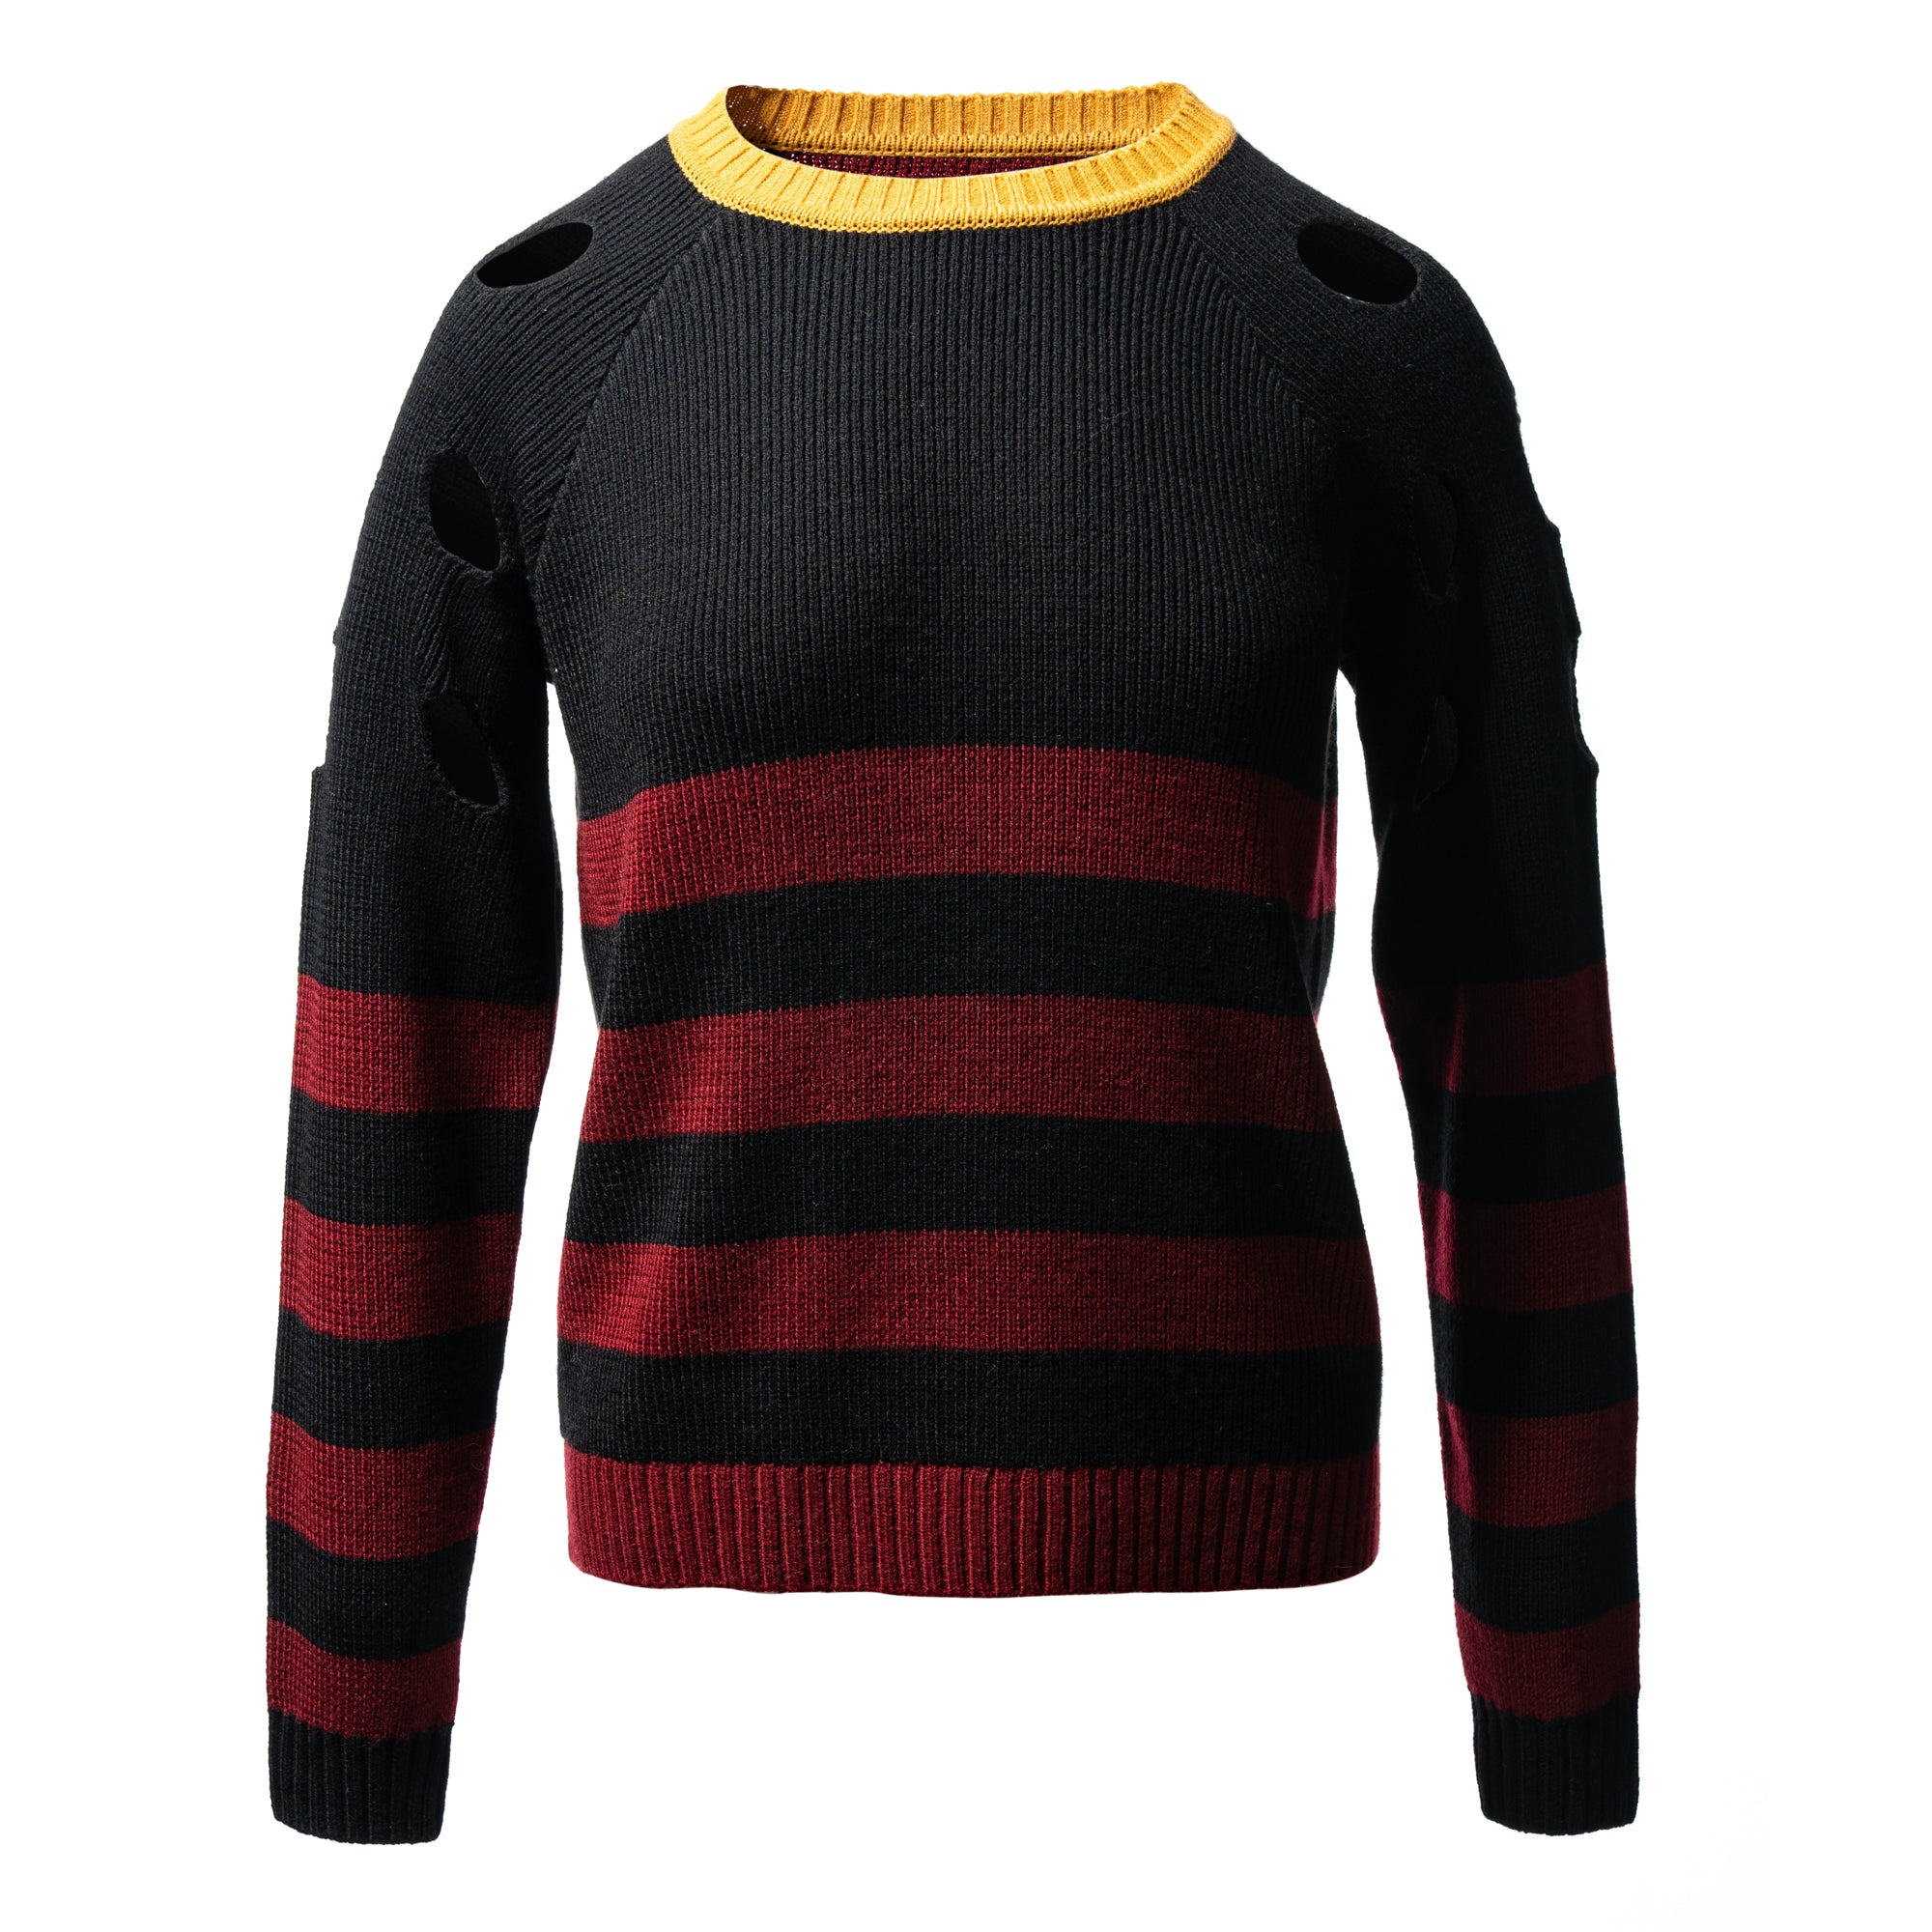 Black sweater with red stripes and holes on the shoulder